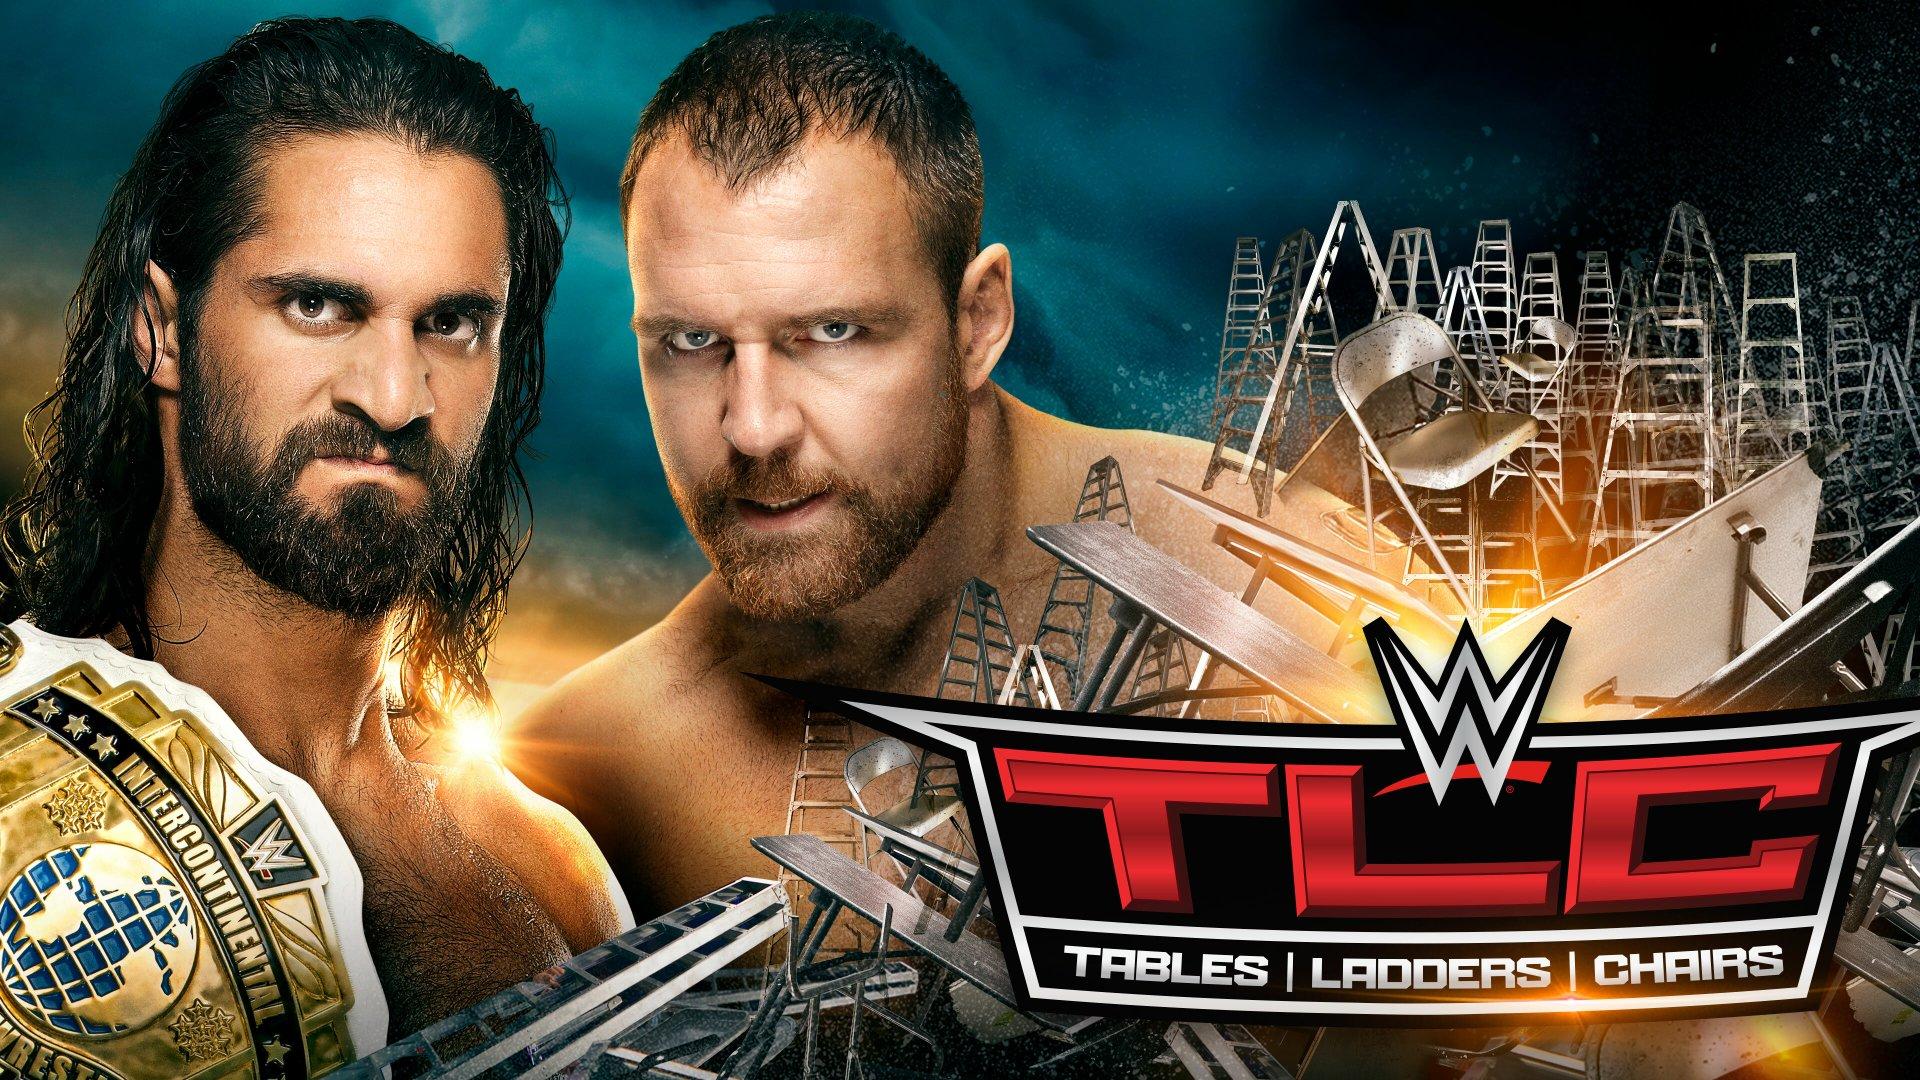 WWE TLC - Tables, Ladders & Chairs 2018